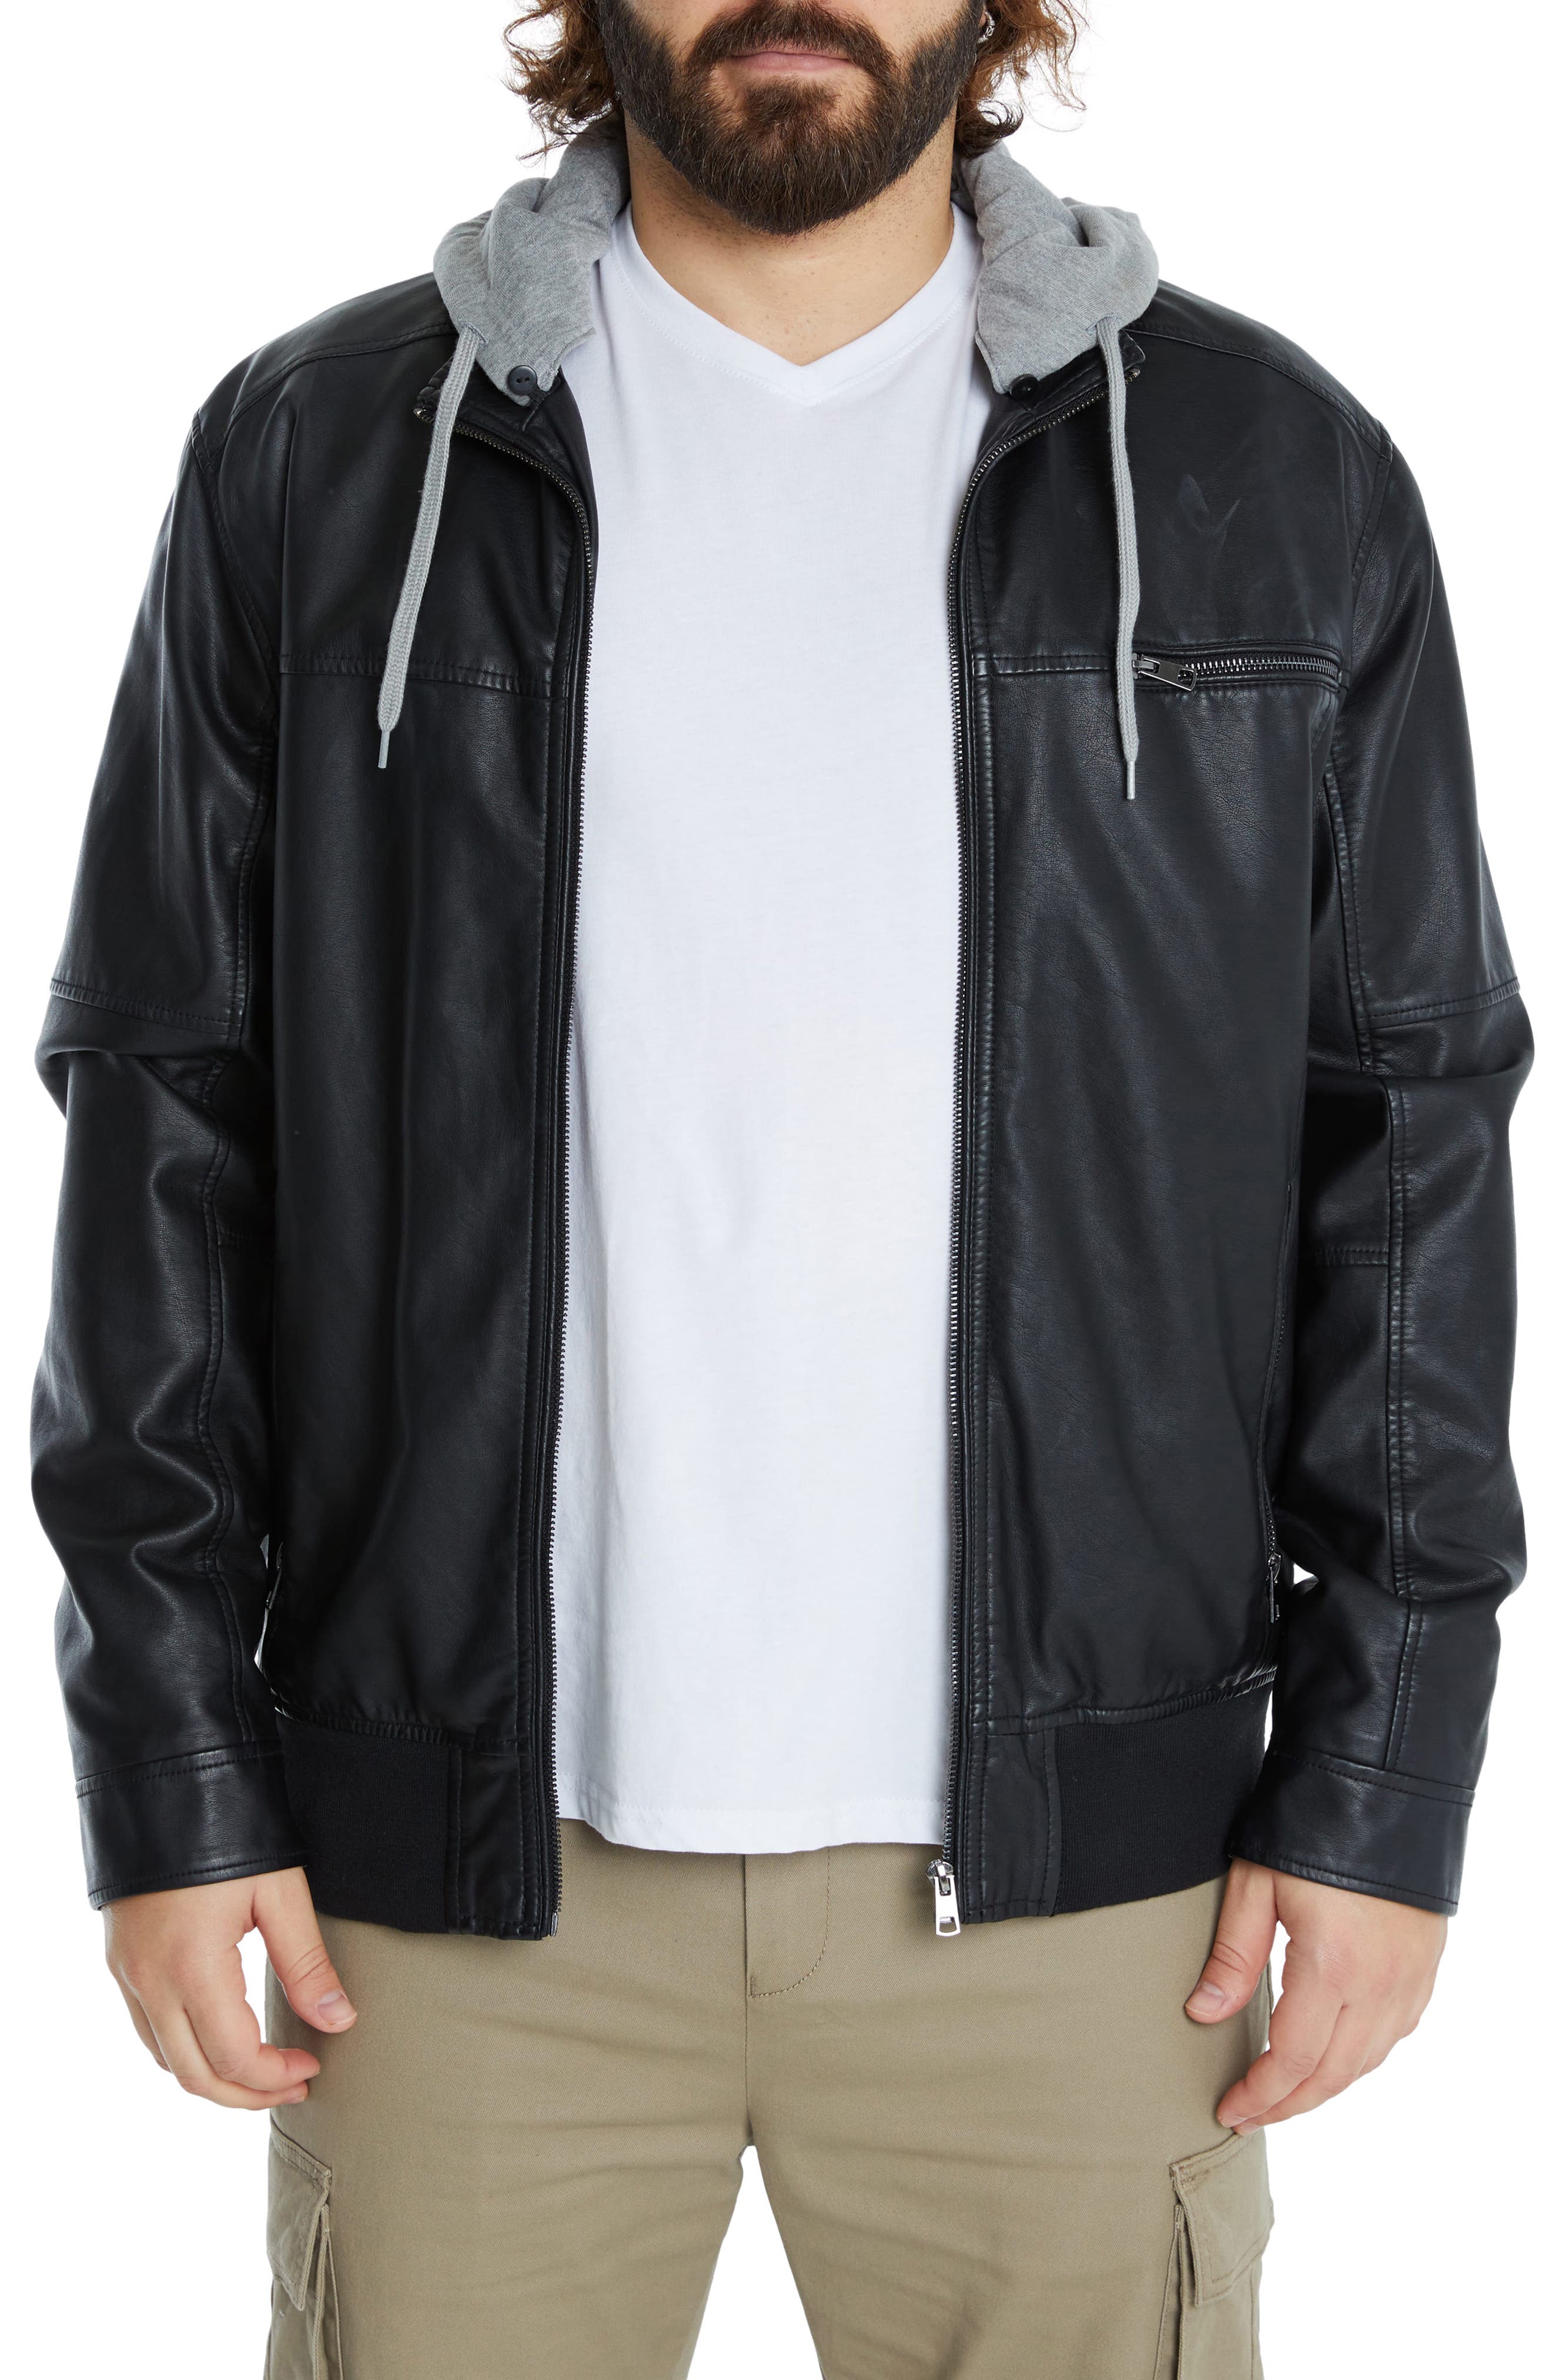 Johnny Bigg Damon Hooded Faux Leather Jacket in Black